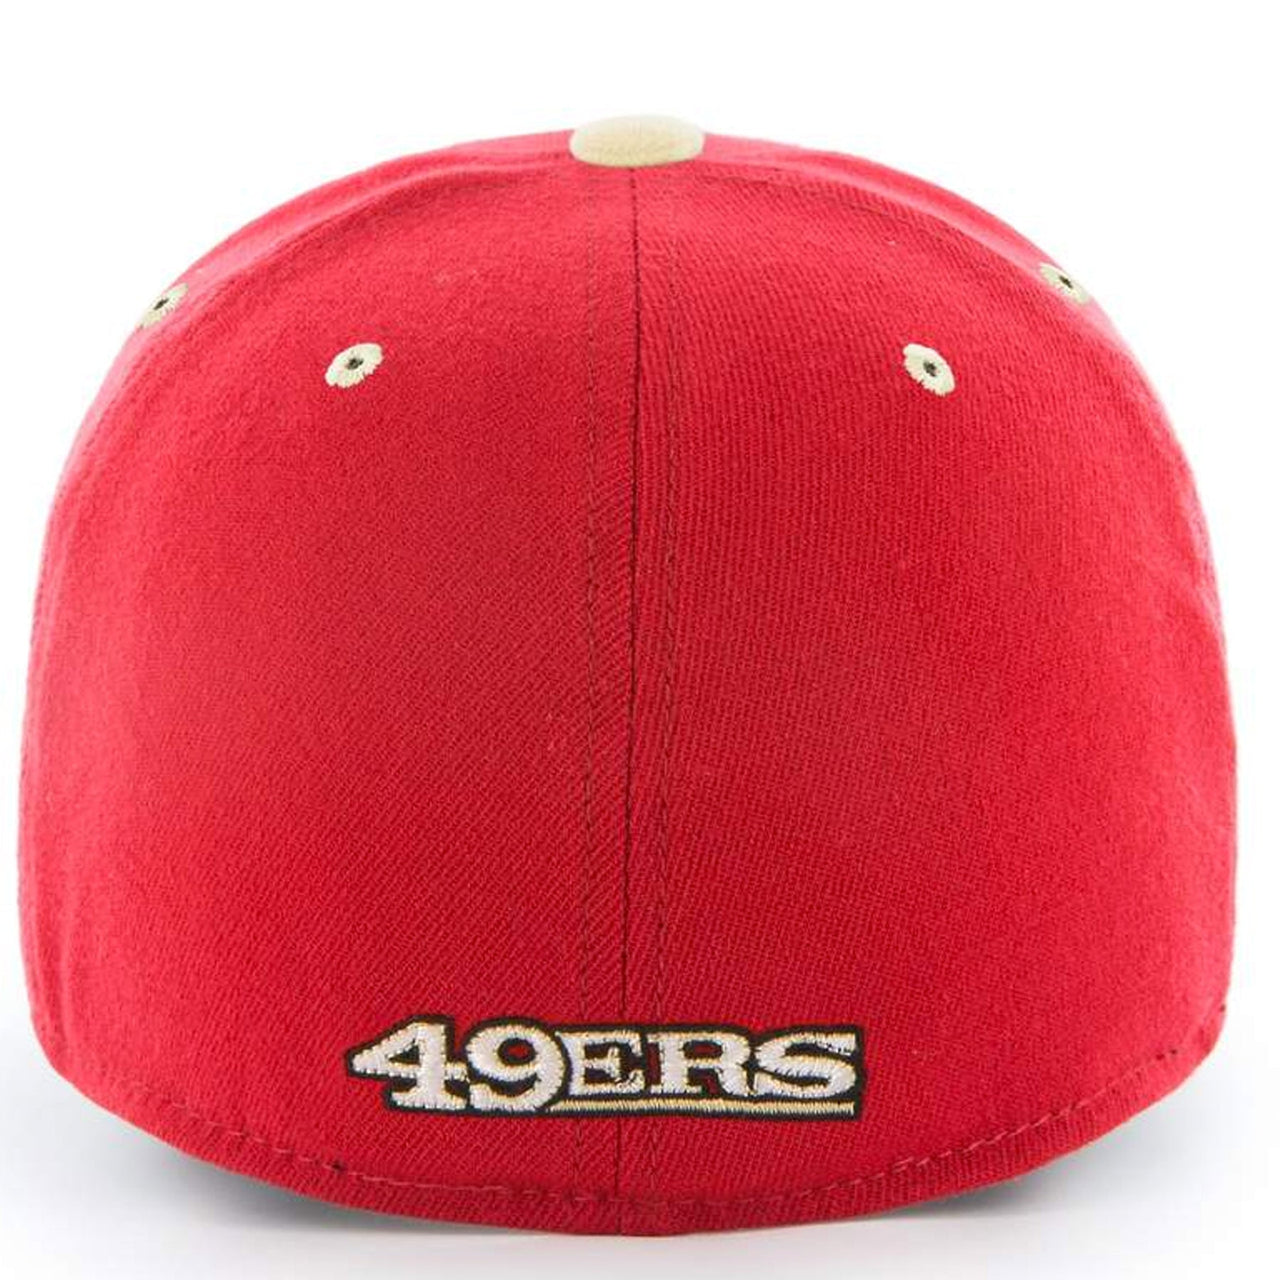 On the back of the red one size fits all San Francisco 49ers stretch fit cap is the 49ers wordmark embroidered in white and black